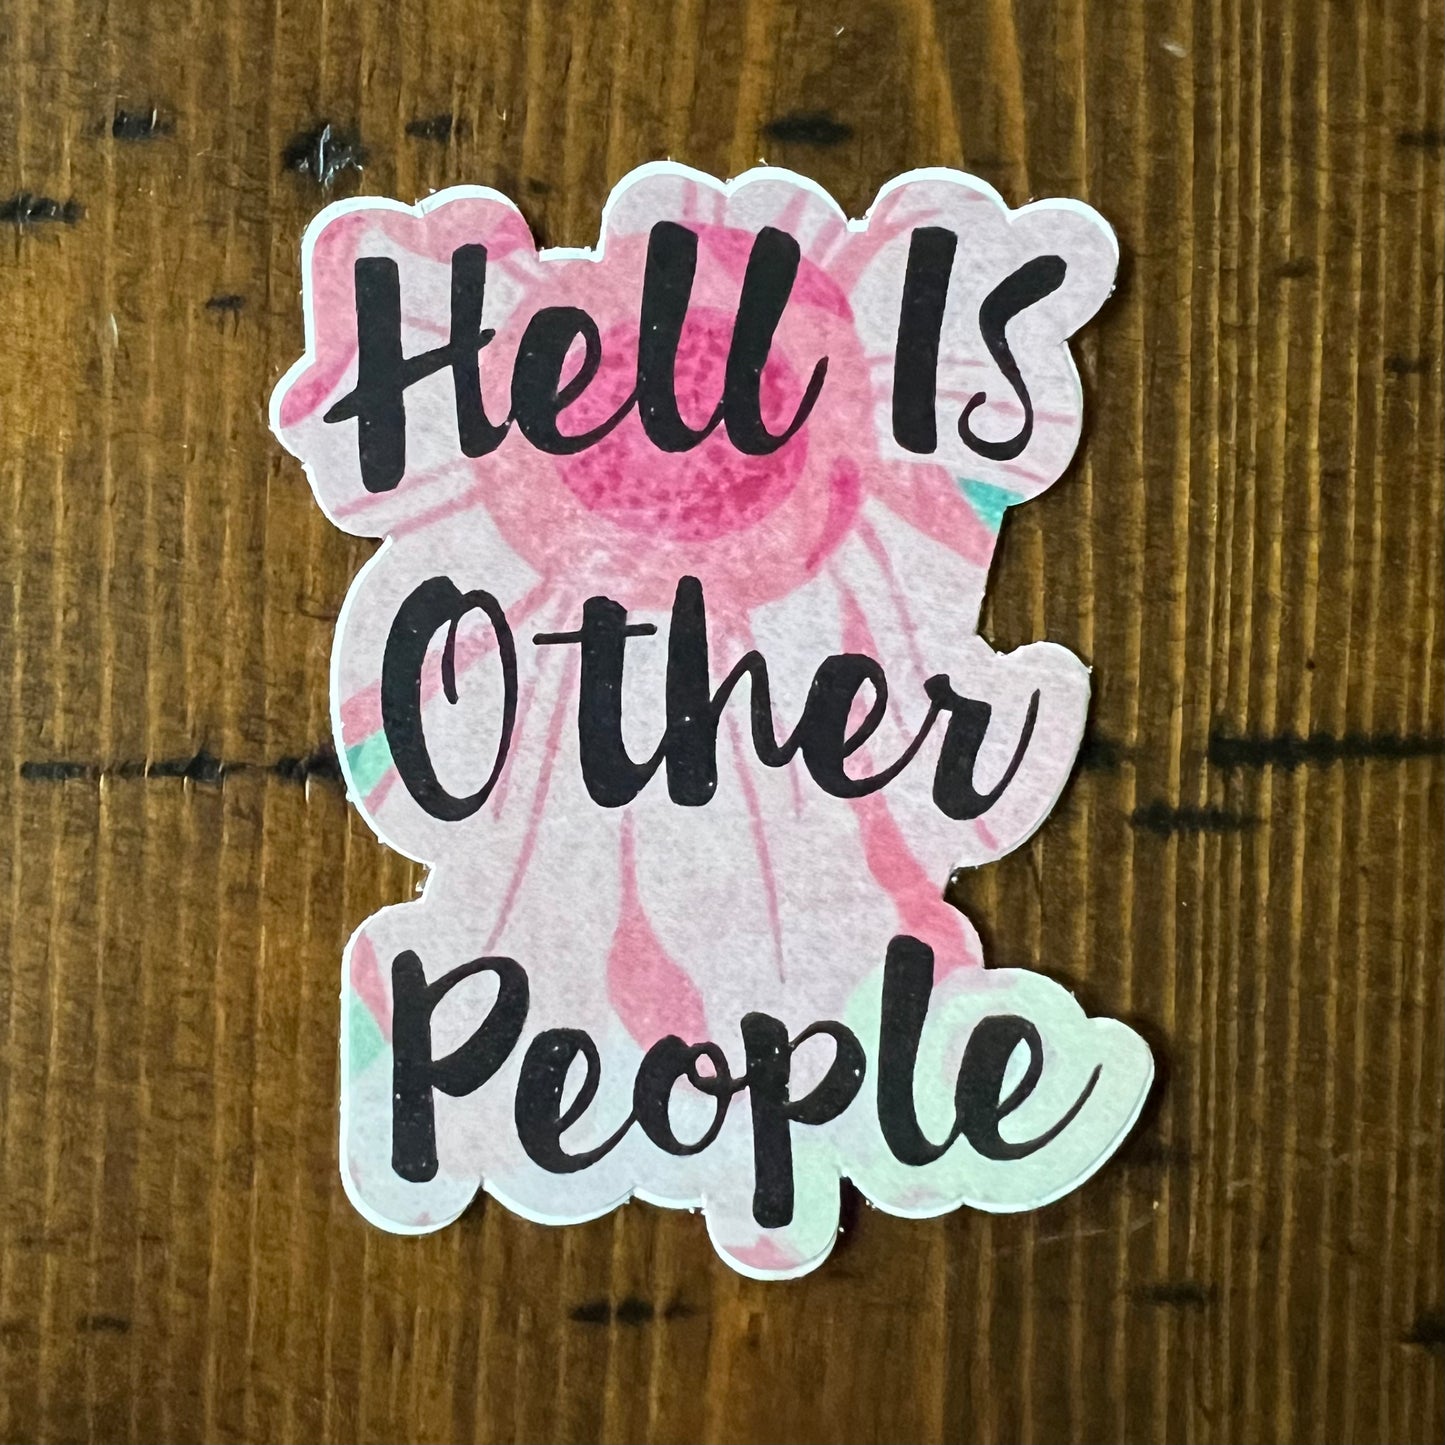 Hell Is Other People Vinyl Sticker